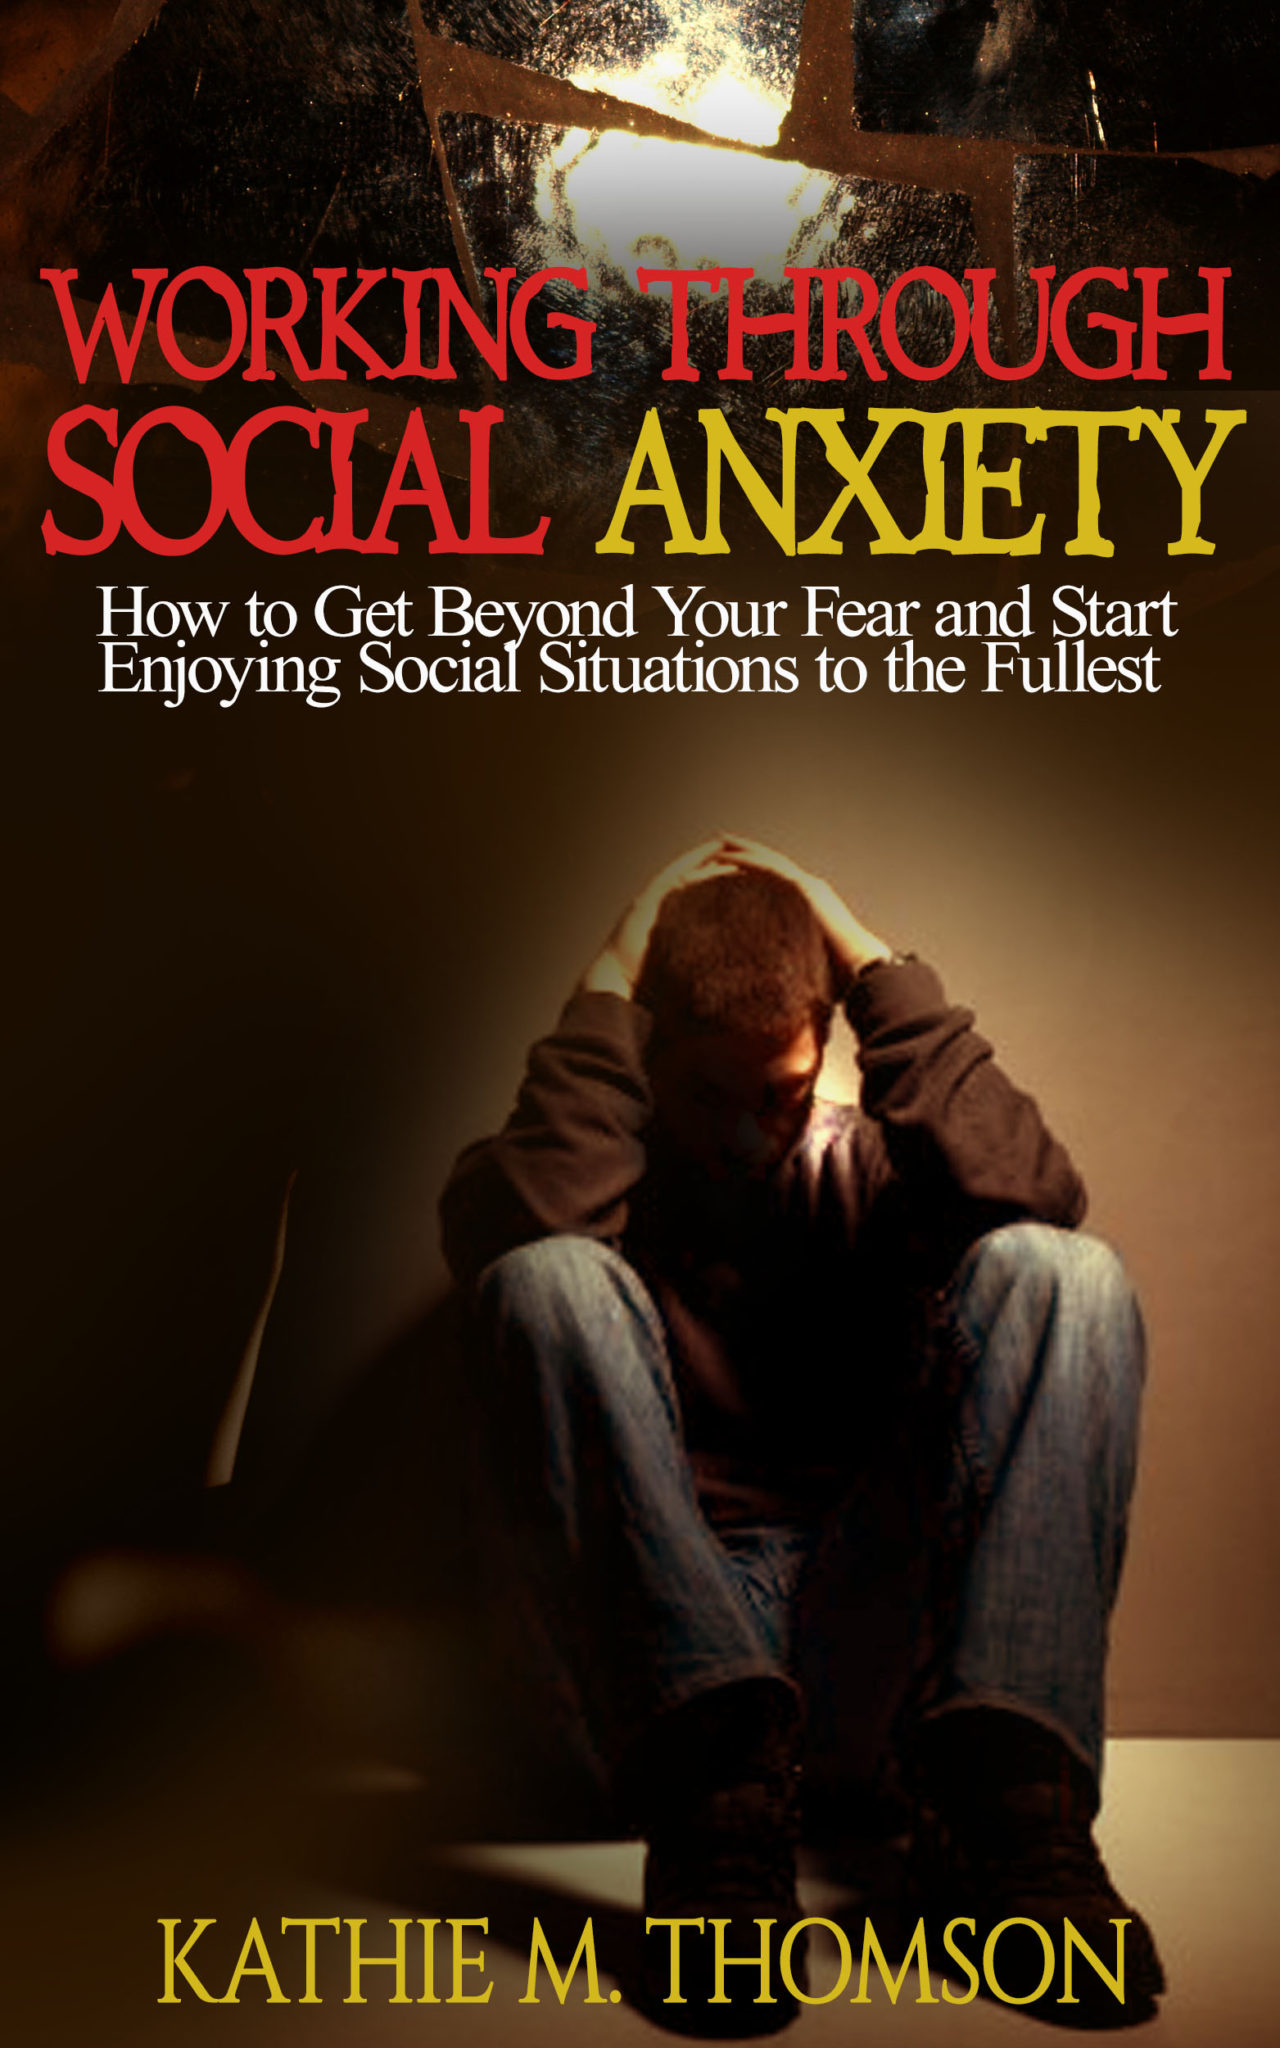 Working through Social Anxiety: How to Get Beyond Your Fear and Start Enjoying Social Situations to the Fullest by Kathie M. Thomson